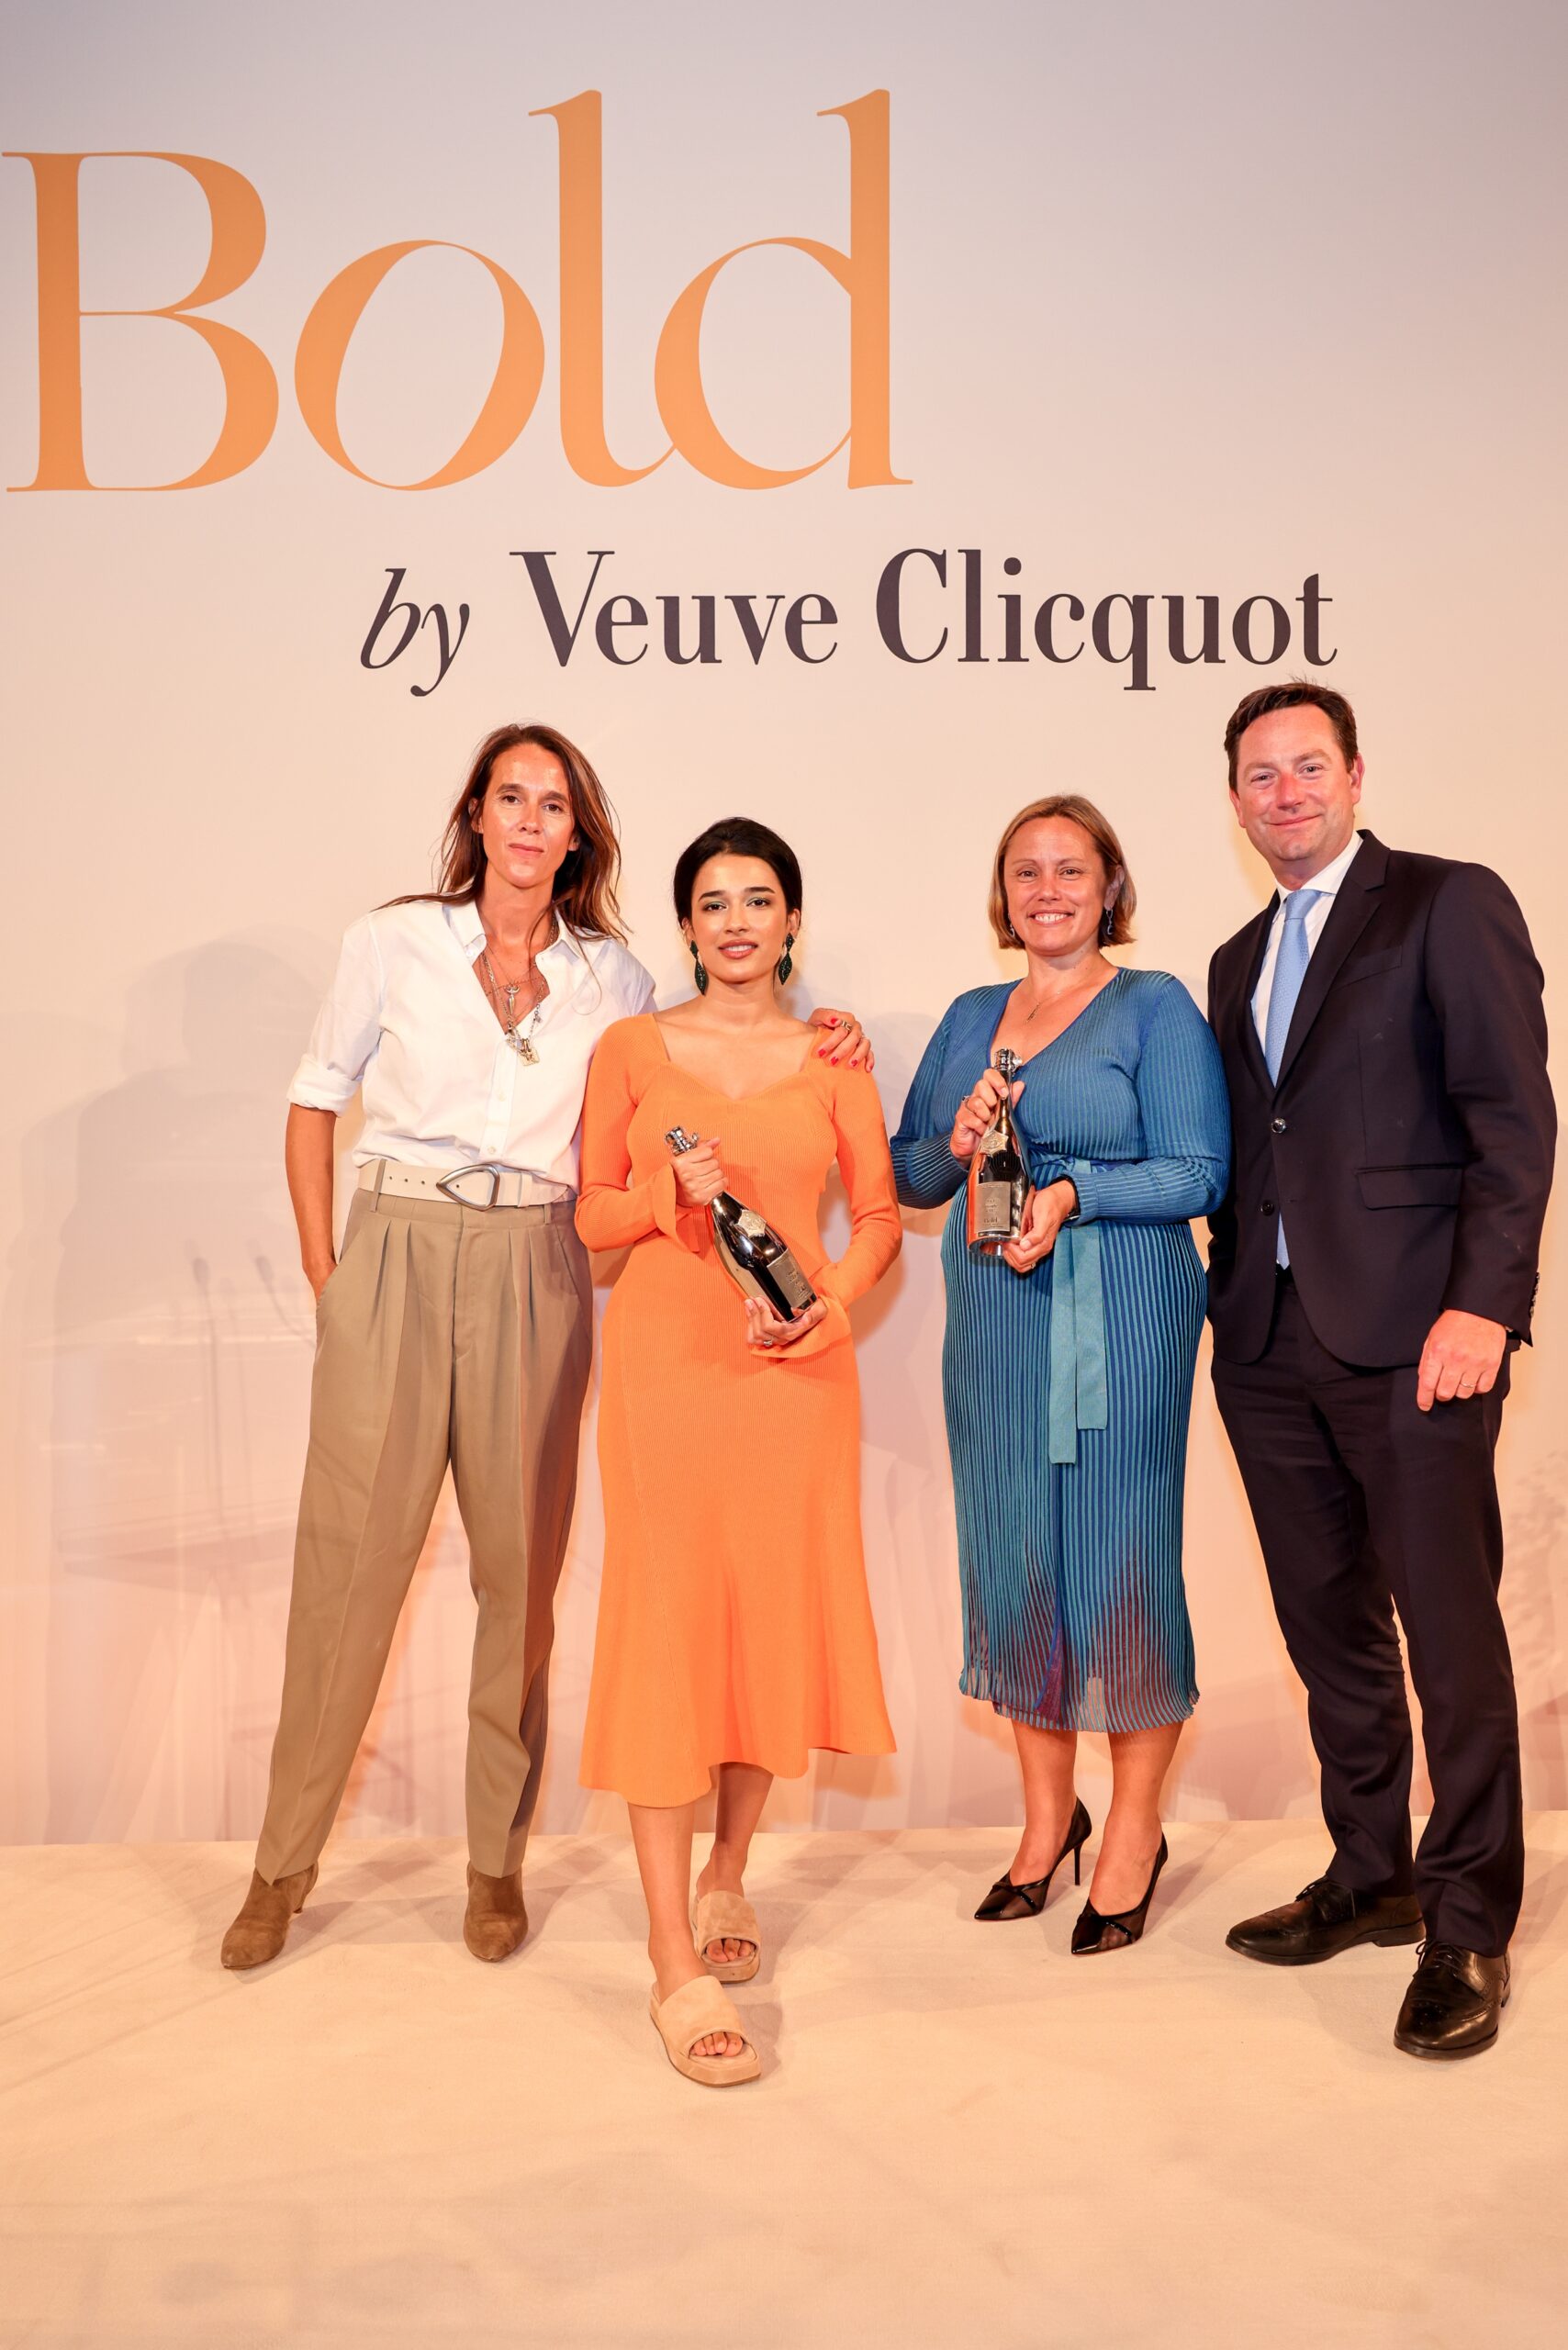 The 50th Bold Woman Award Ceremony by Veuve Clicquot